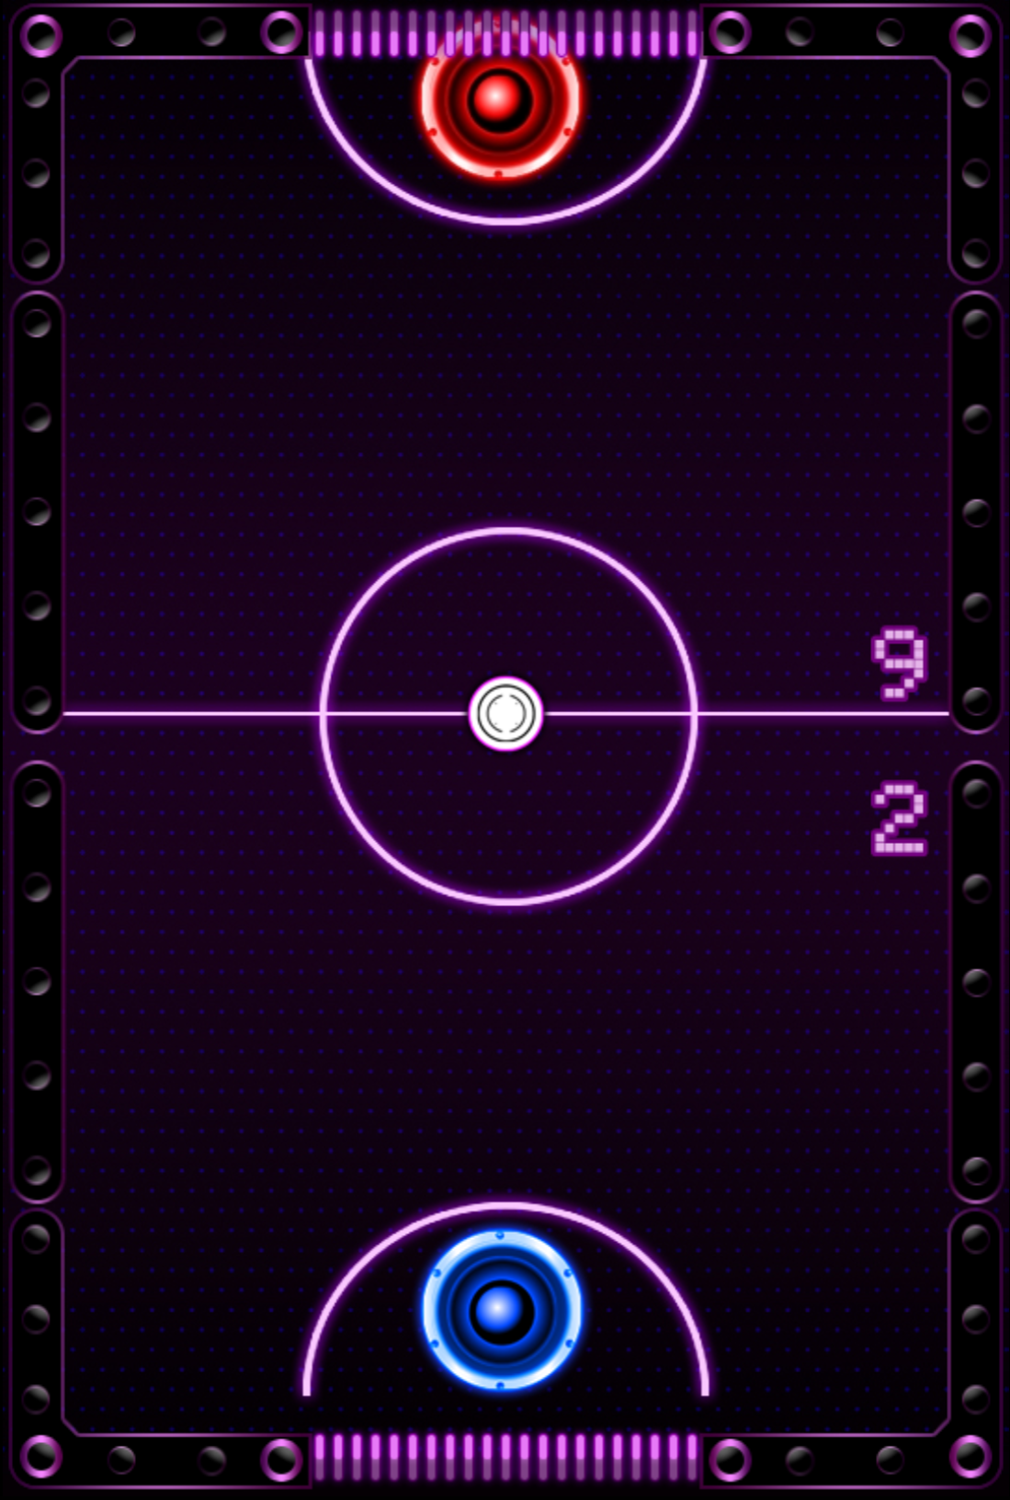 Neon Air Hockey HTML5 Game Play Airhockey Online for Free